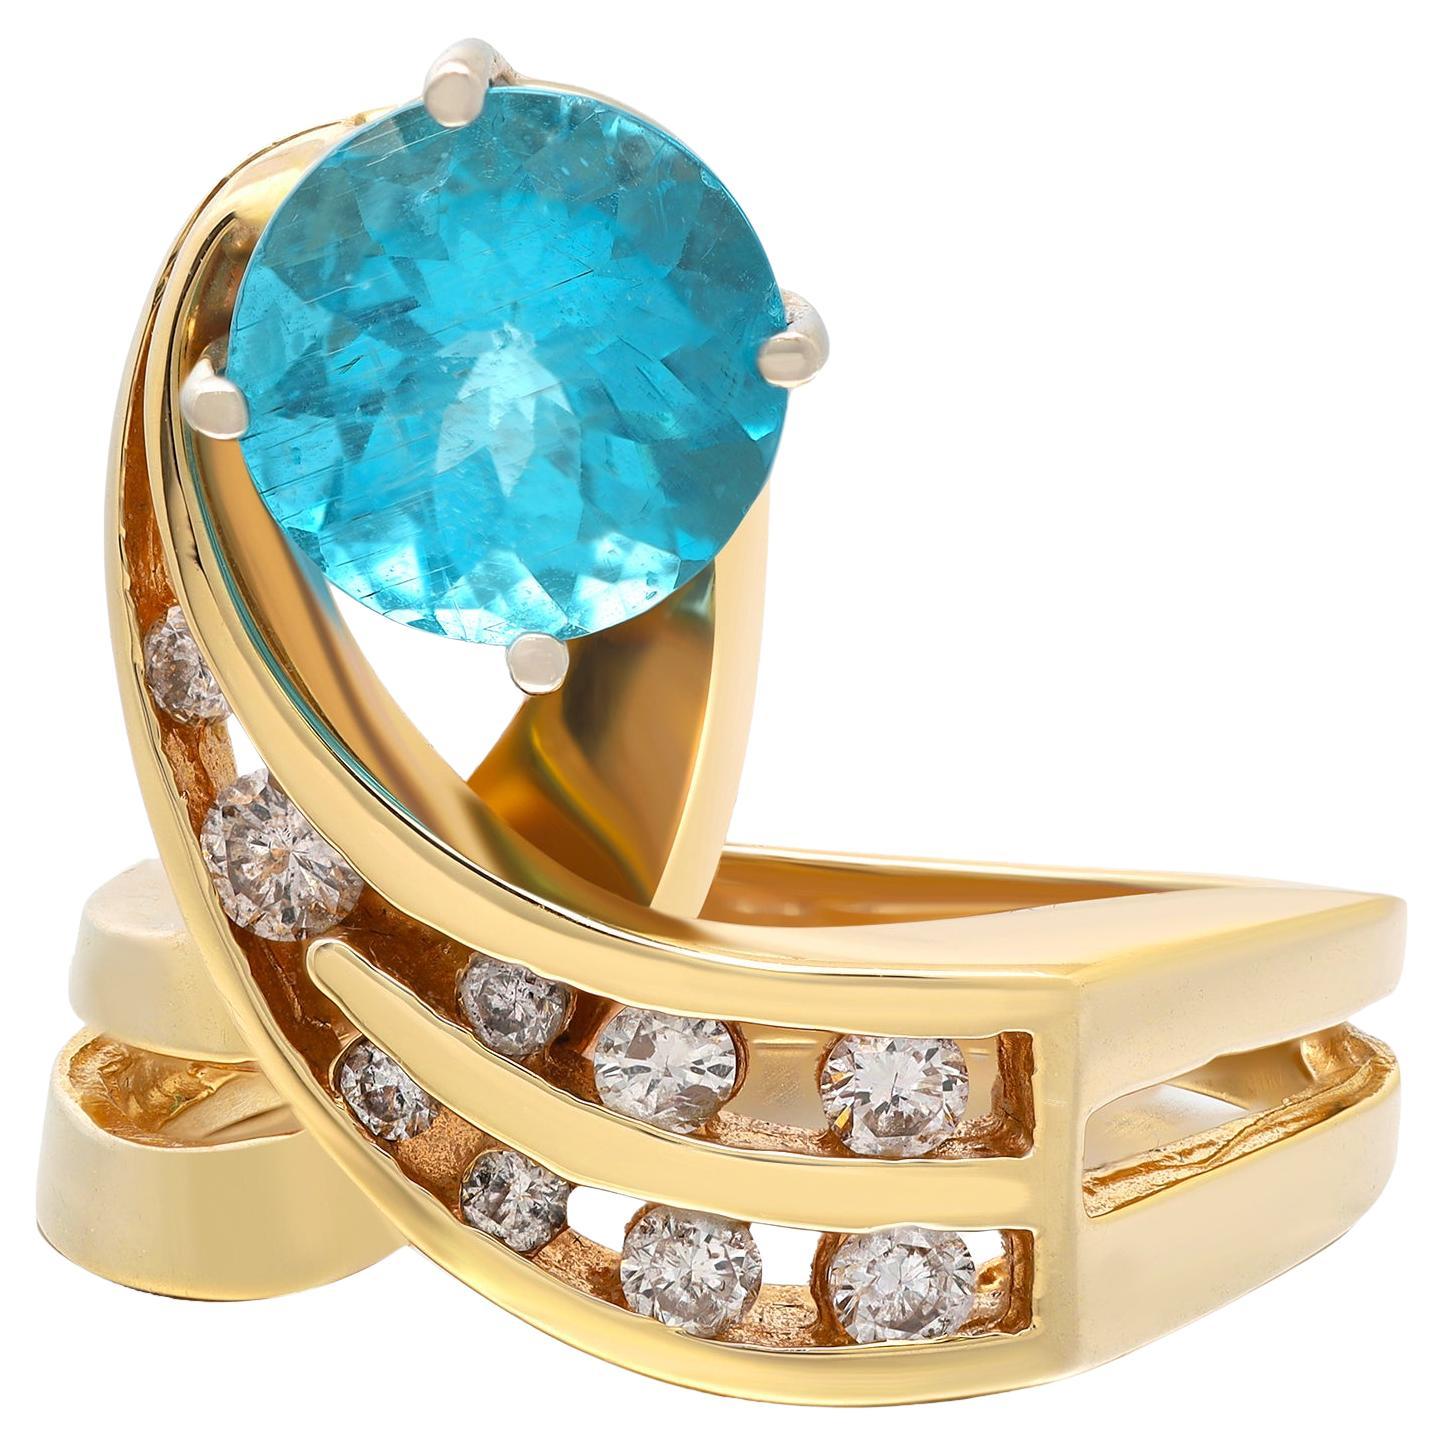 2.19Cttw Apatite And 0.45Cttw Diamond Cocktail Ring 14K Yellow Gold